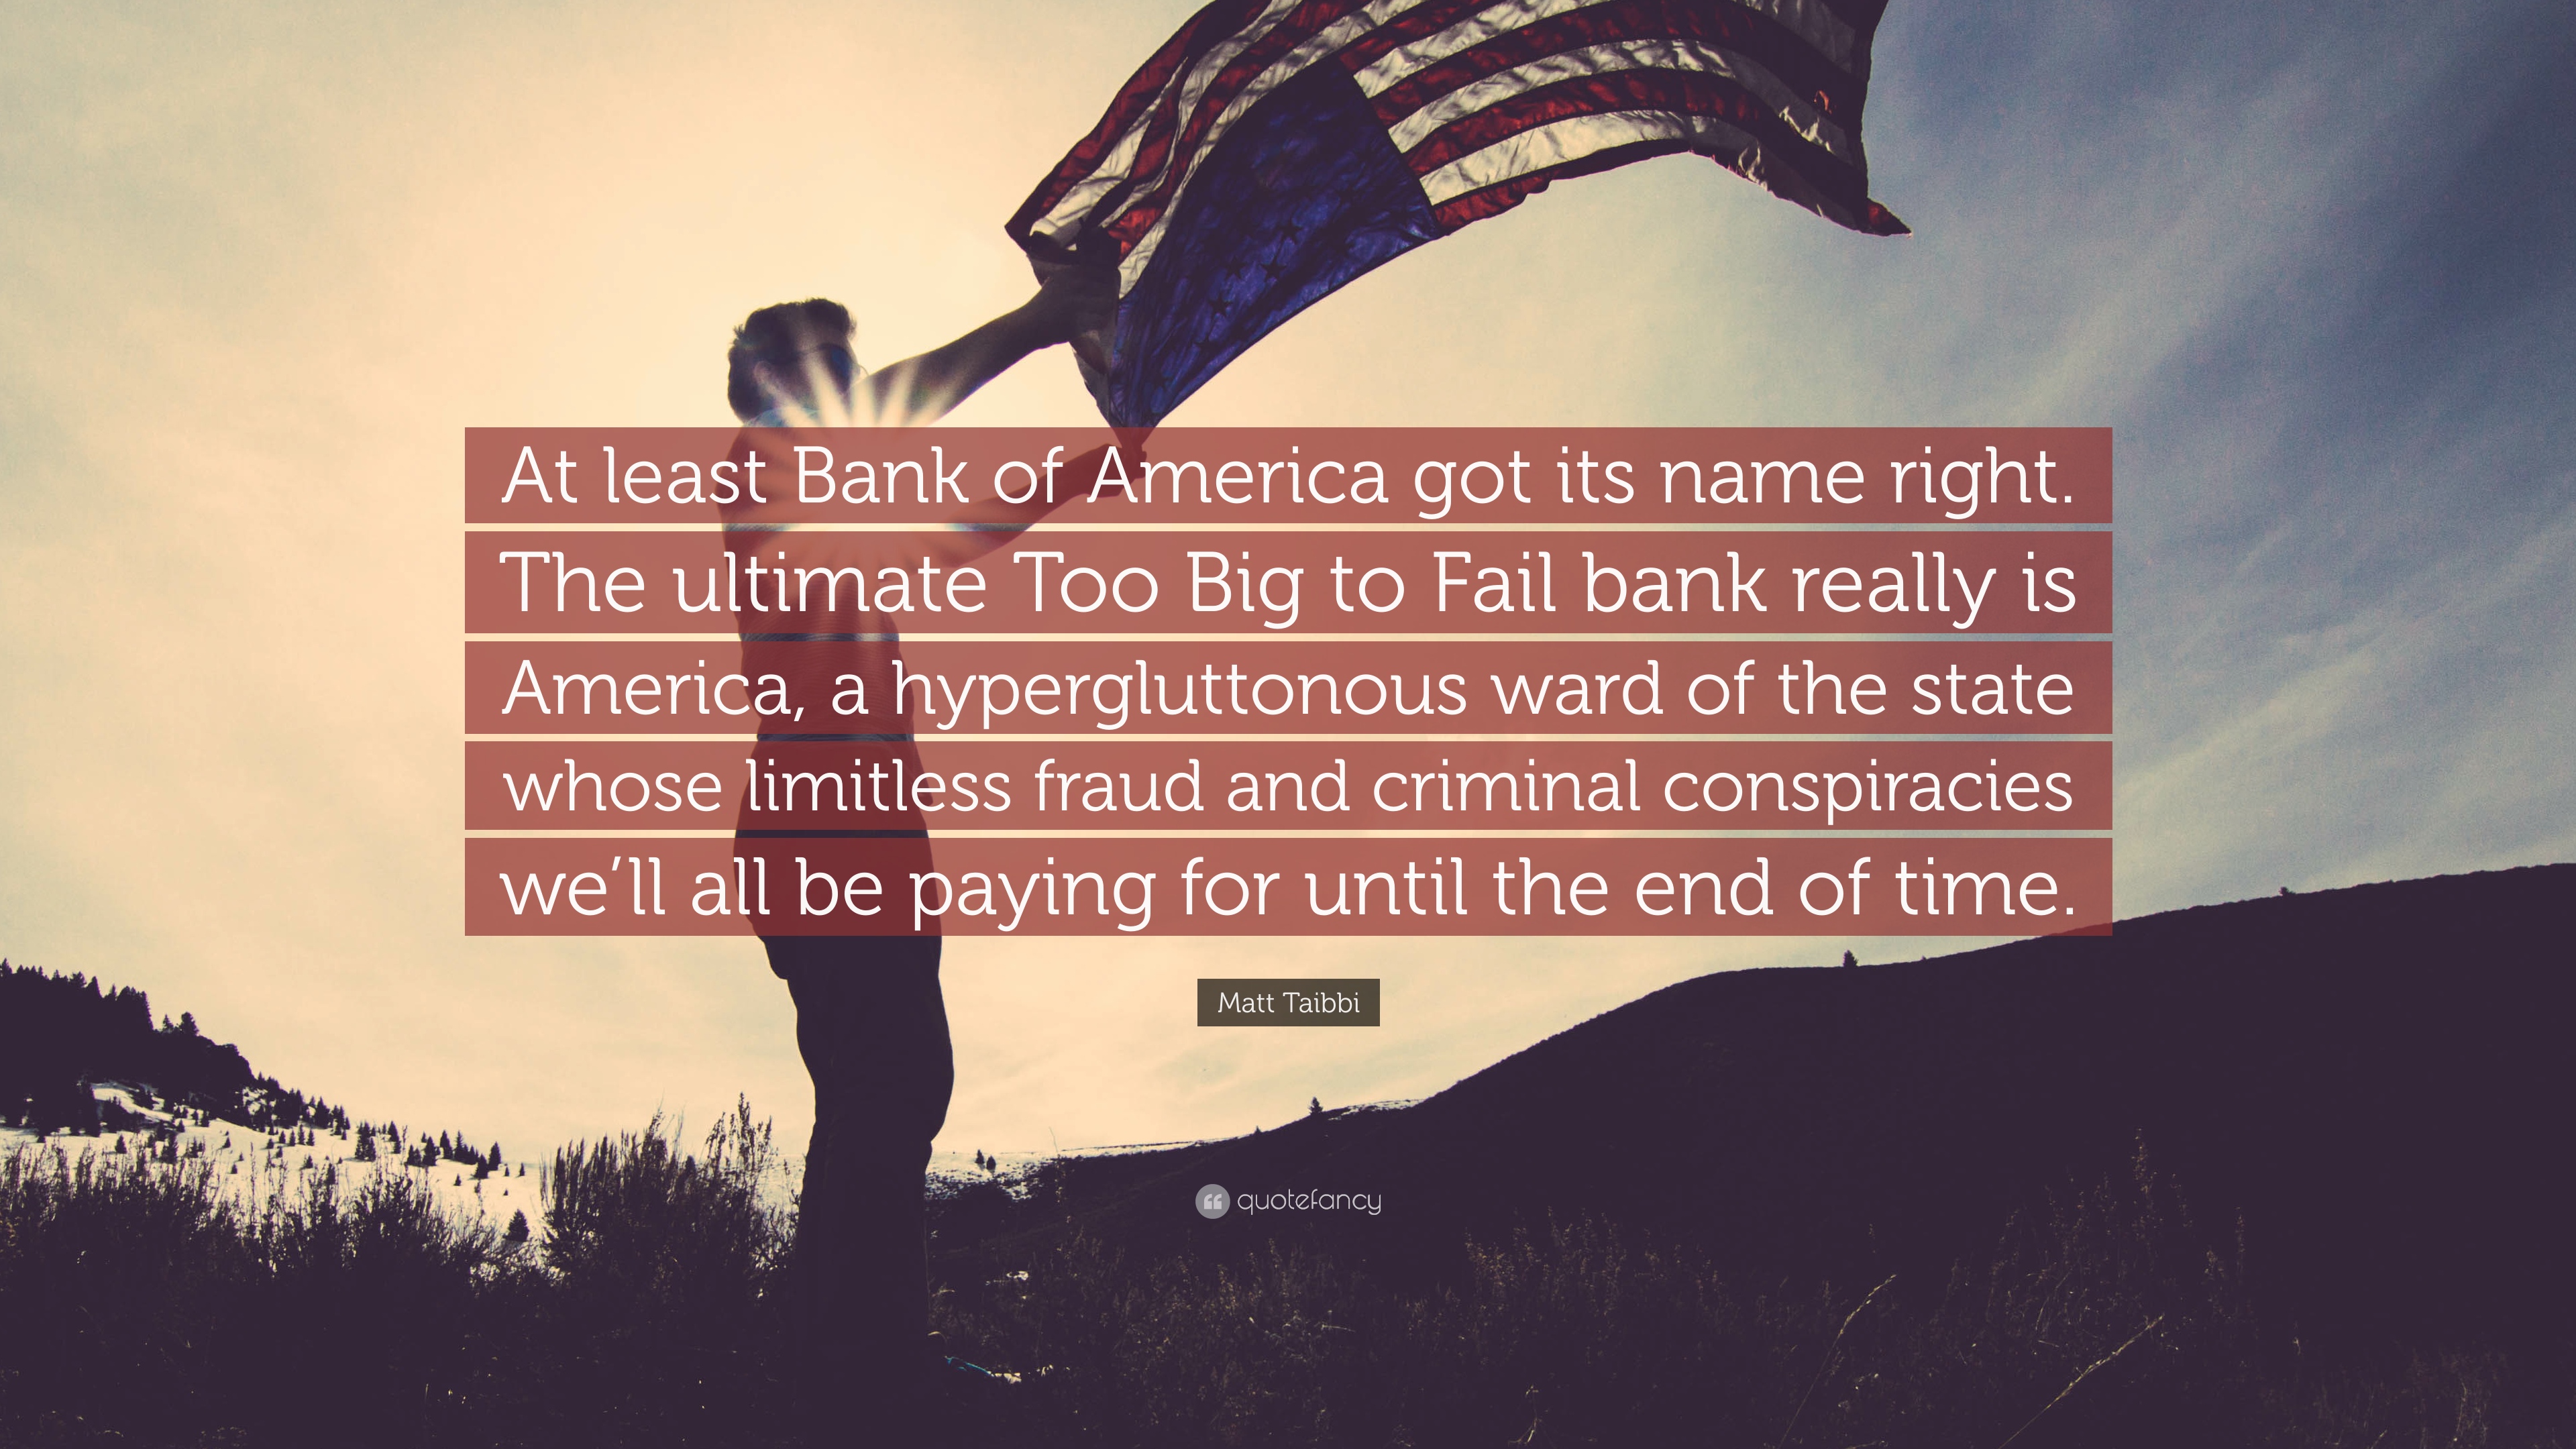 Matt Taibbi Quote: “At least Bank of America got its name right